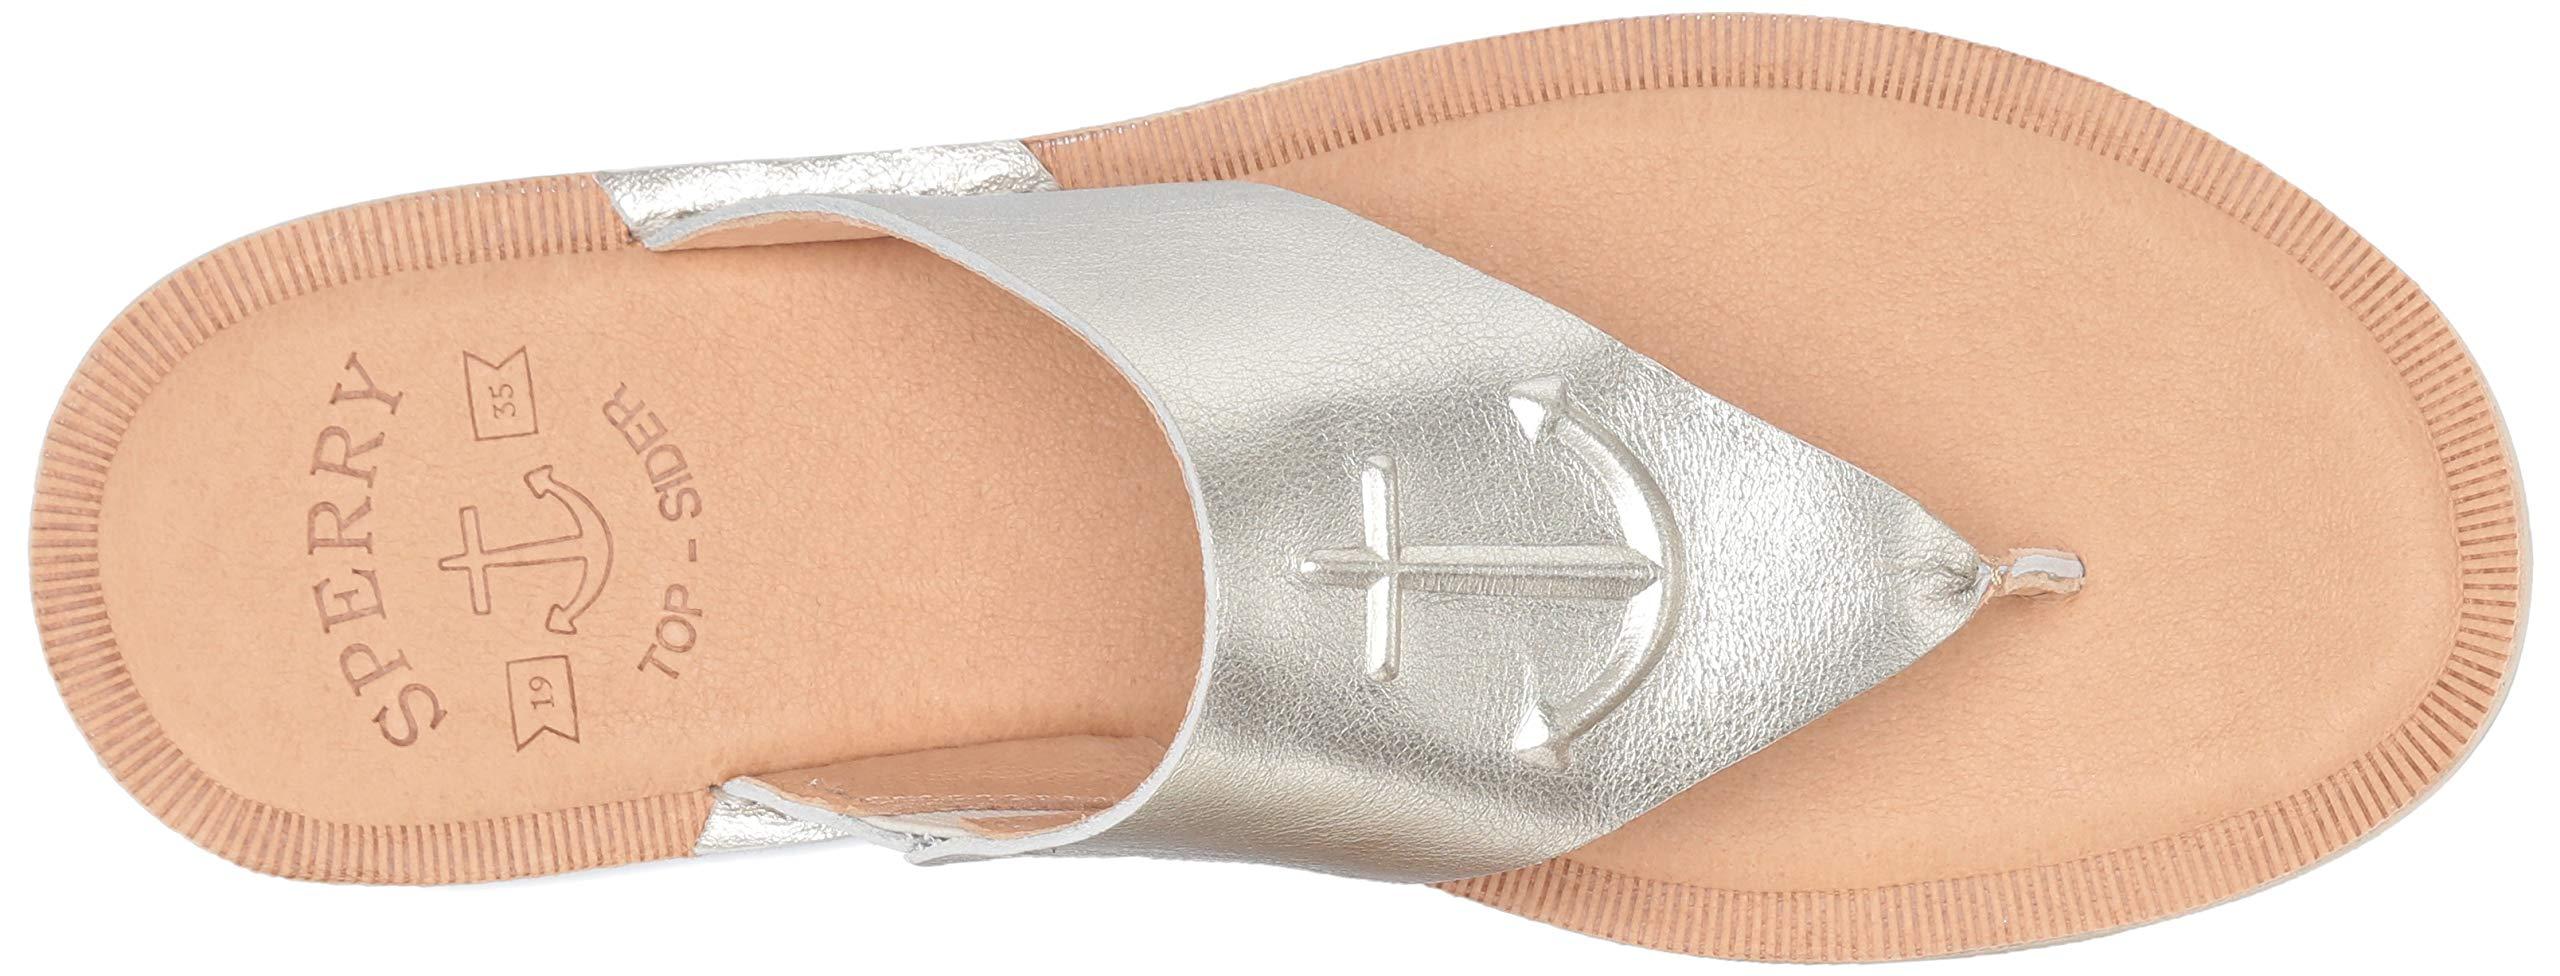 sperry seaport thong